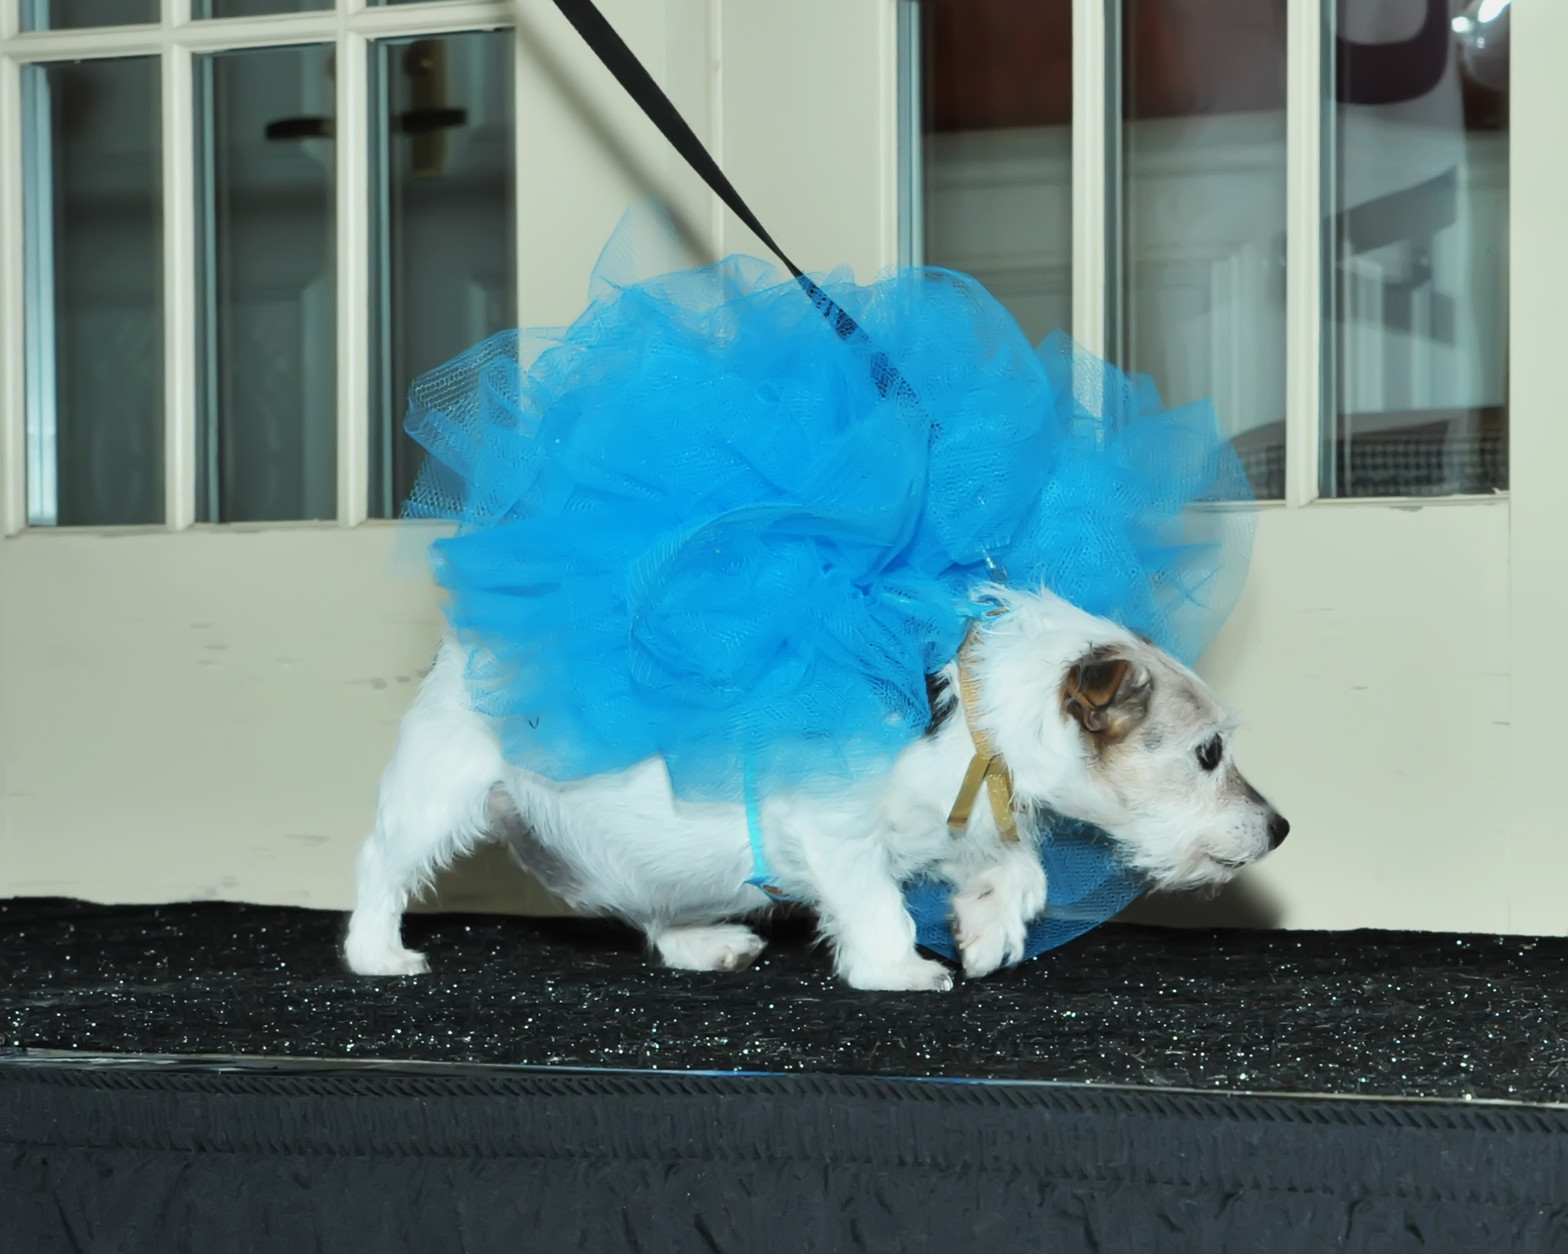 Snuggles the dog dressed as a loofah. (Shannon Finney Photography)